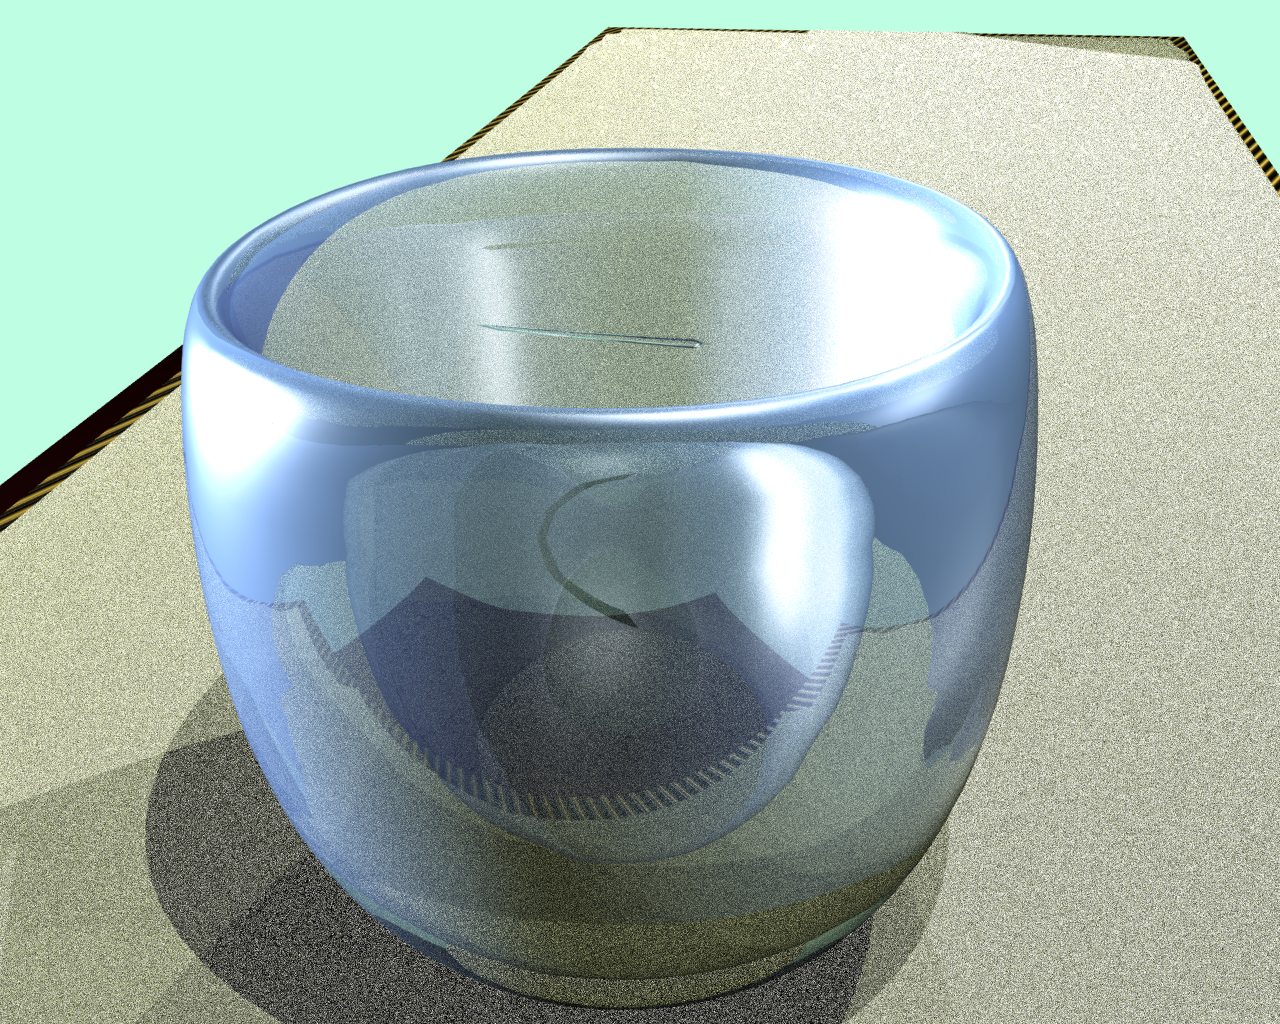 Cup rendered by Yafray